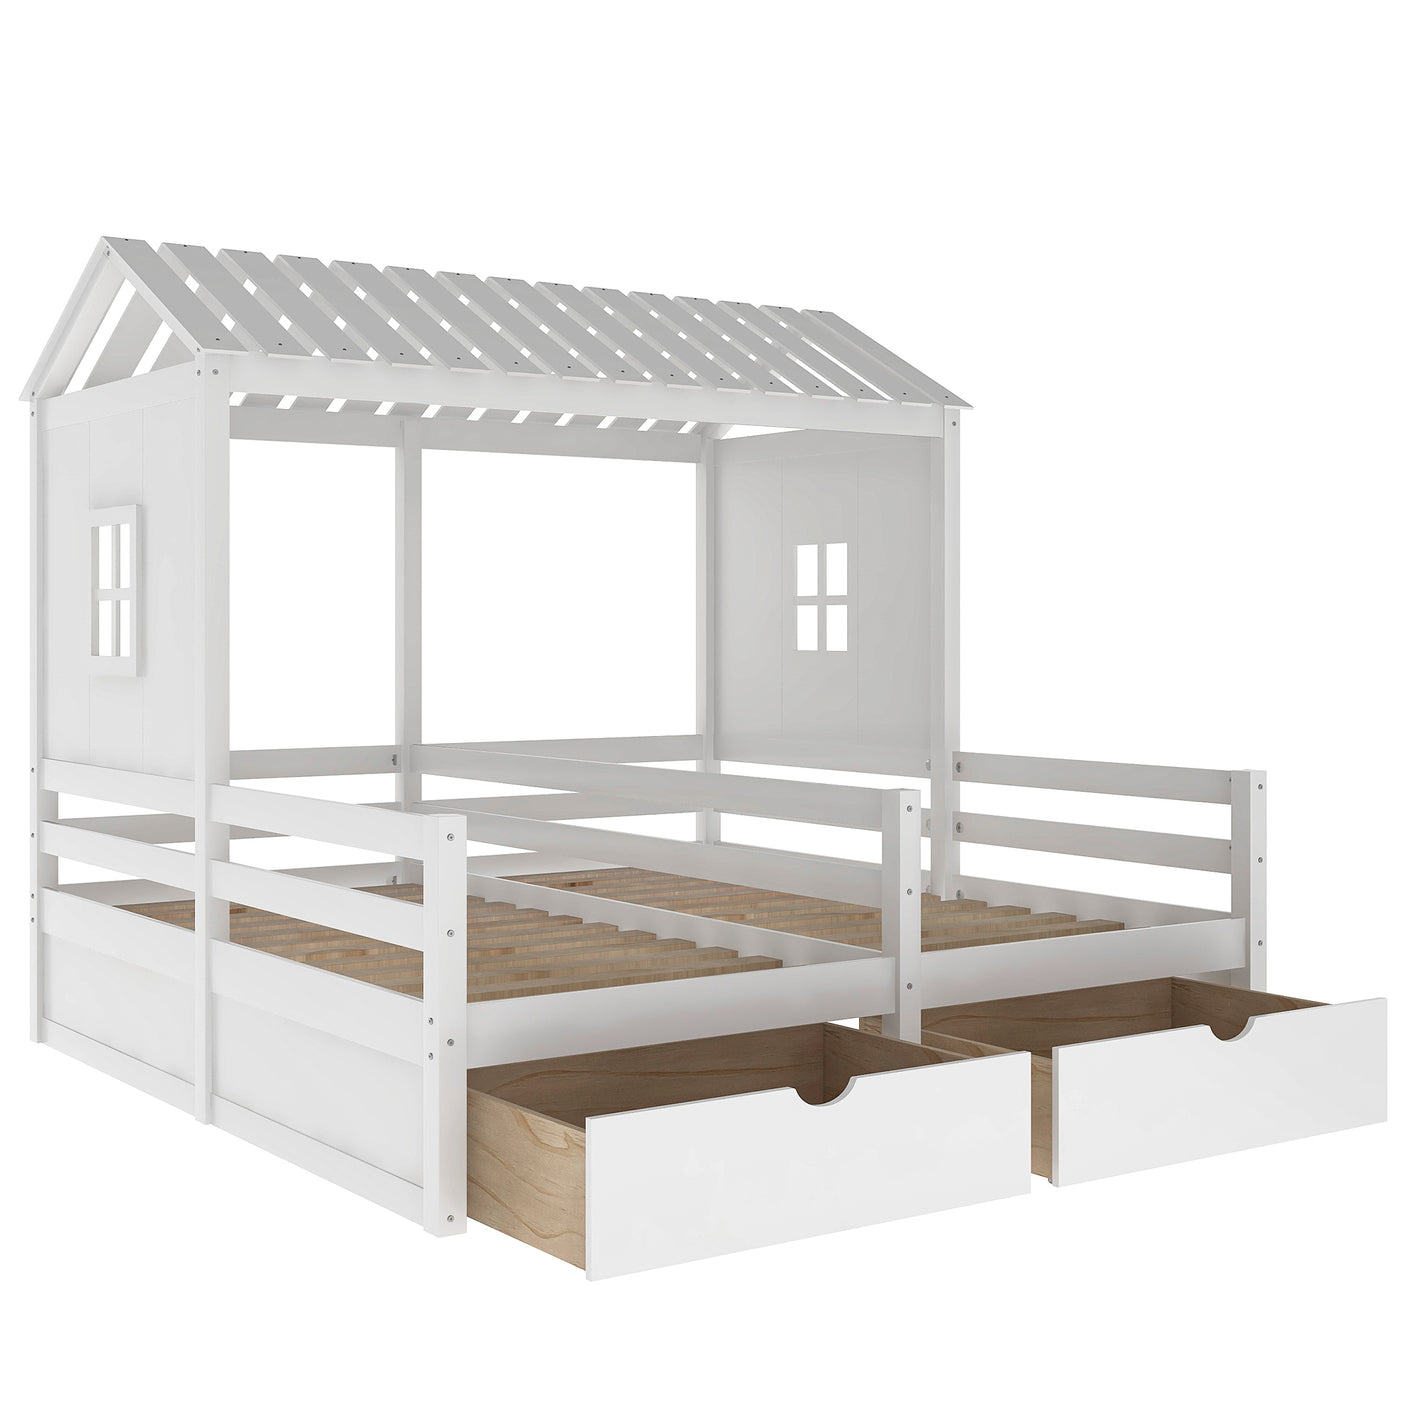 Twin Size House Platform Beds with Two Drawers for Boy and Girl Shared Beds, Combination of 2 Side by Side Twin Size Beds, White - Home Elegance USA